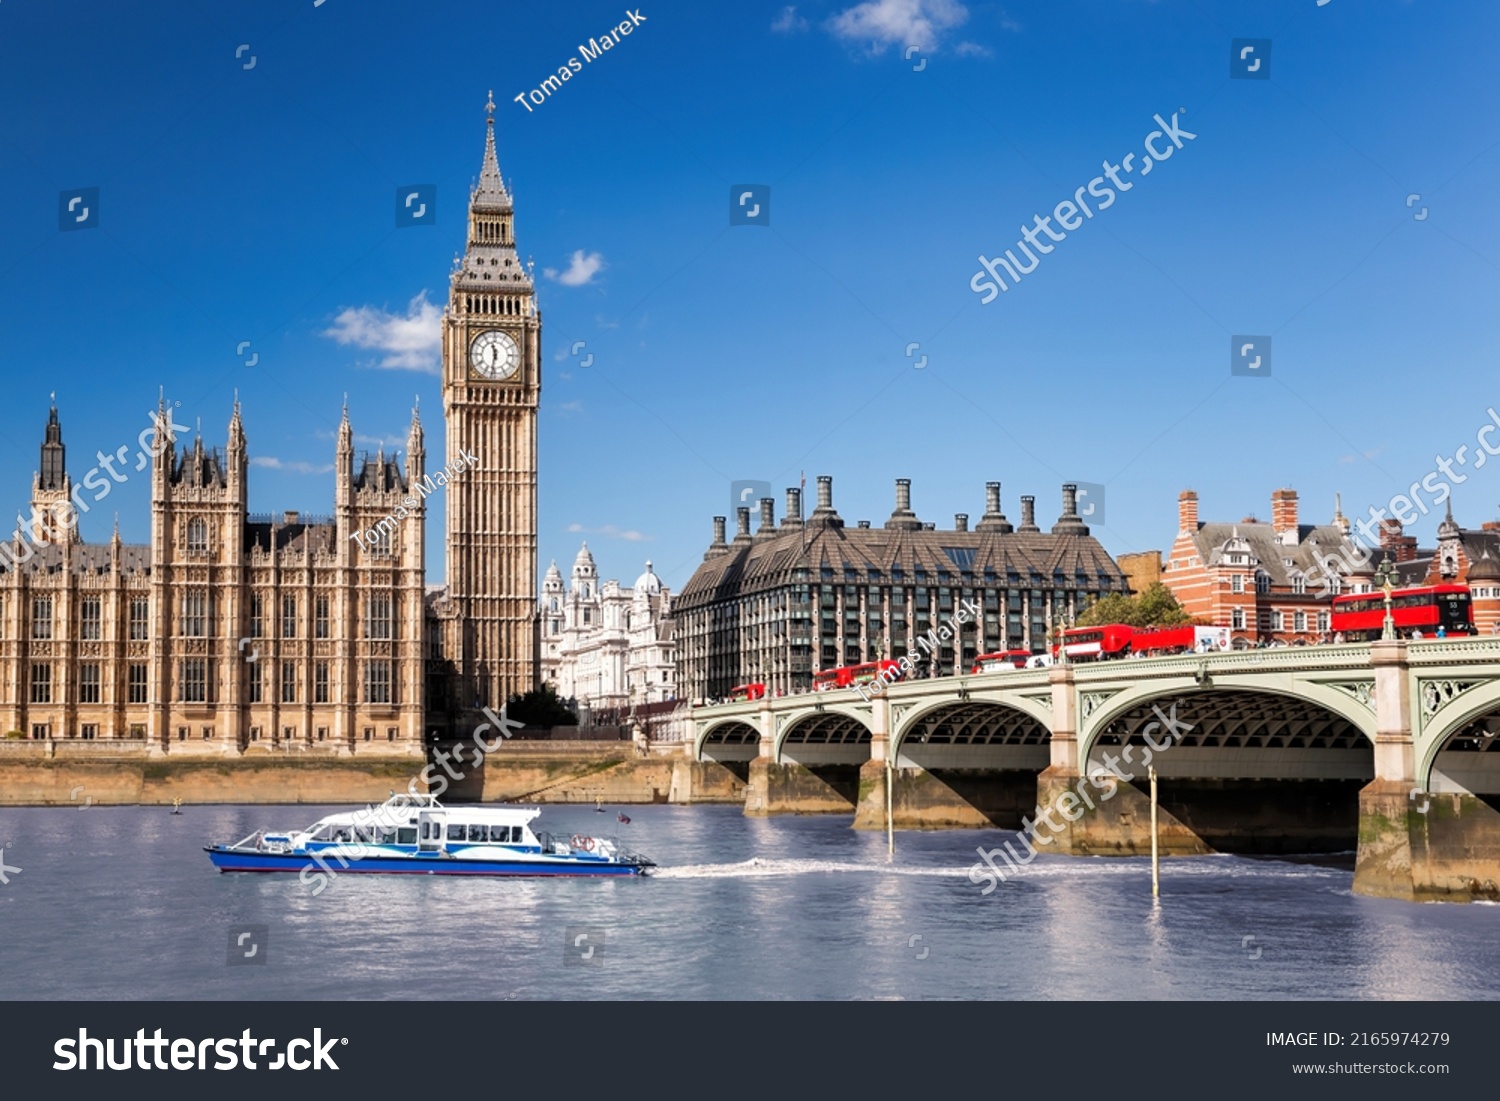 Famous Big Ben with bridge over Thames and tourboat on the river in London, England, UK #2165974279